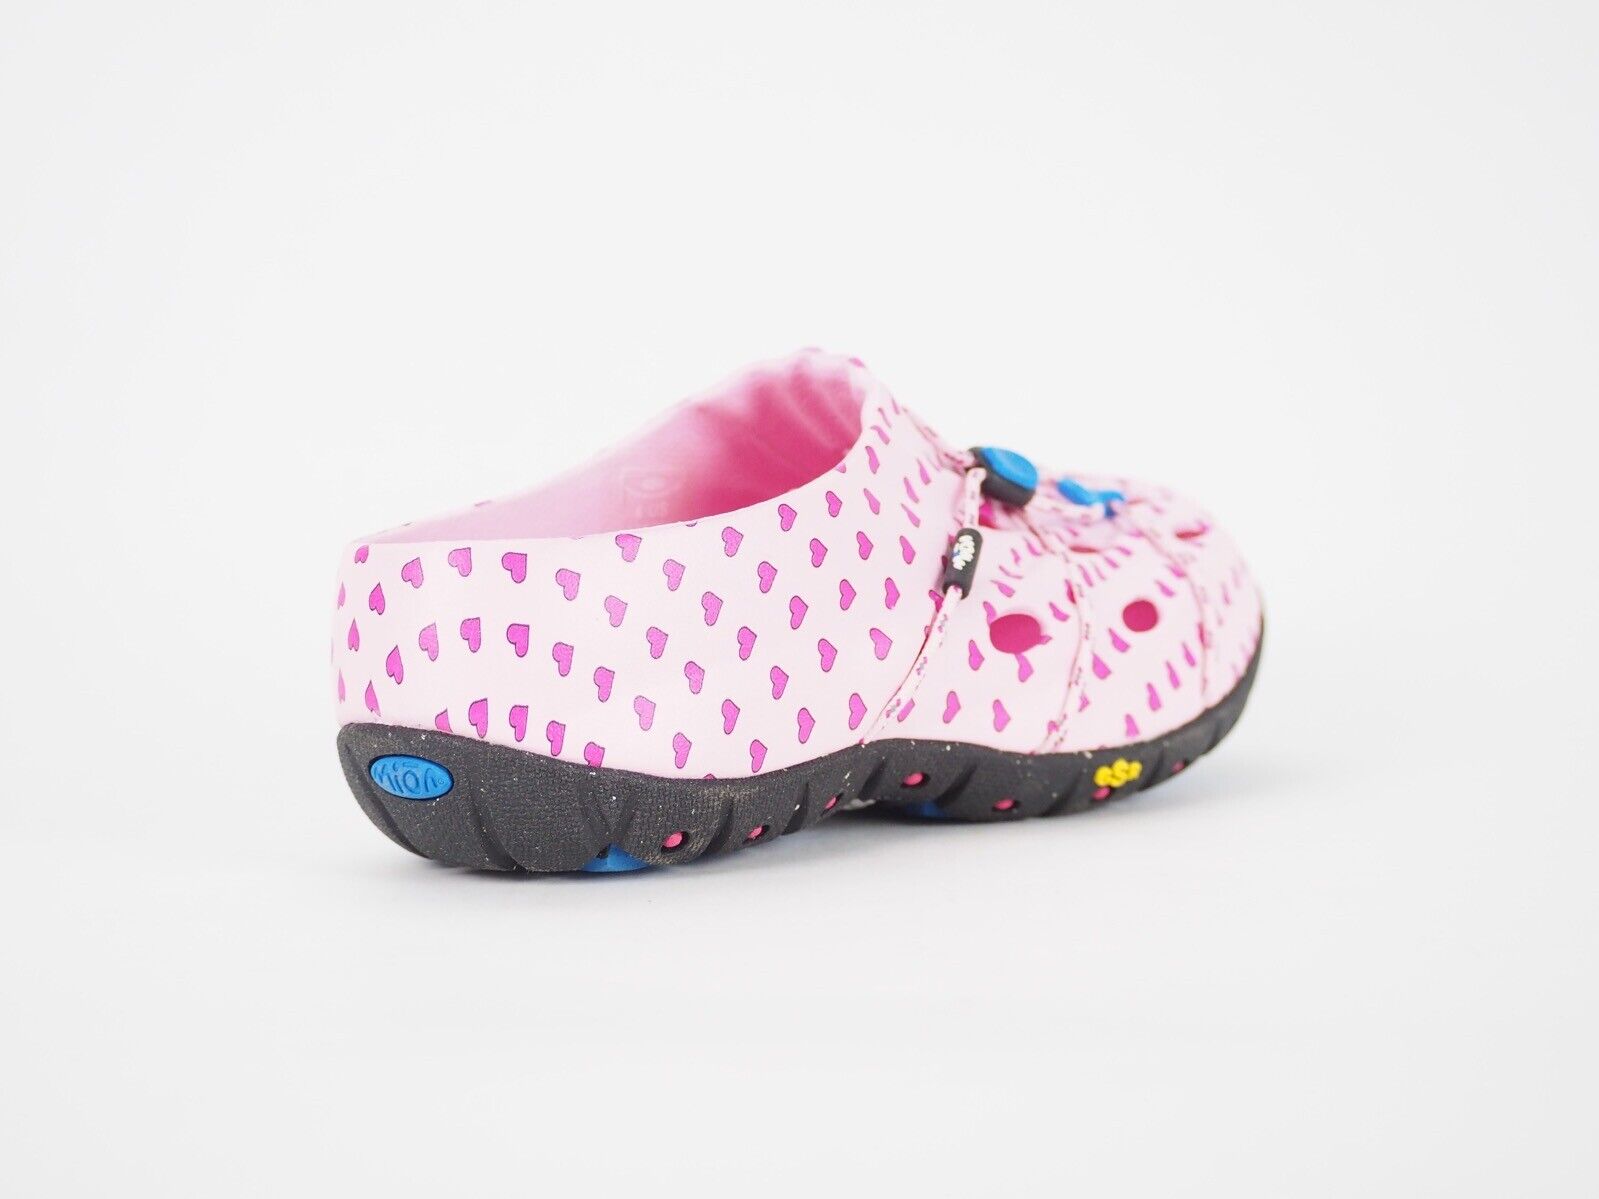 Girls MION Pen Shell 99763 Pink Hearts Rubber Holiday Slip On Summer Clog Shoes - London Top Style